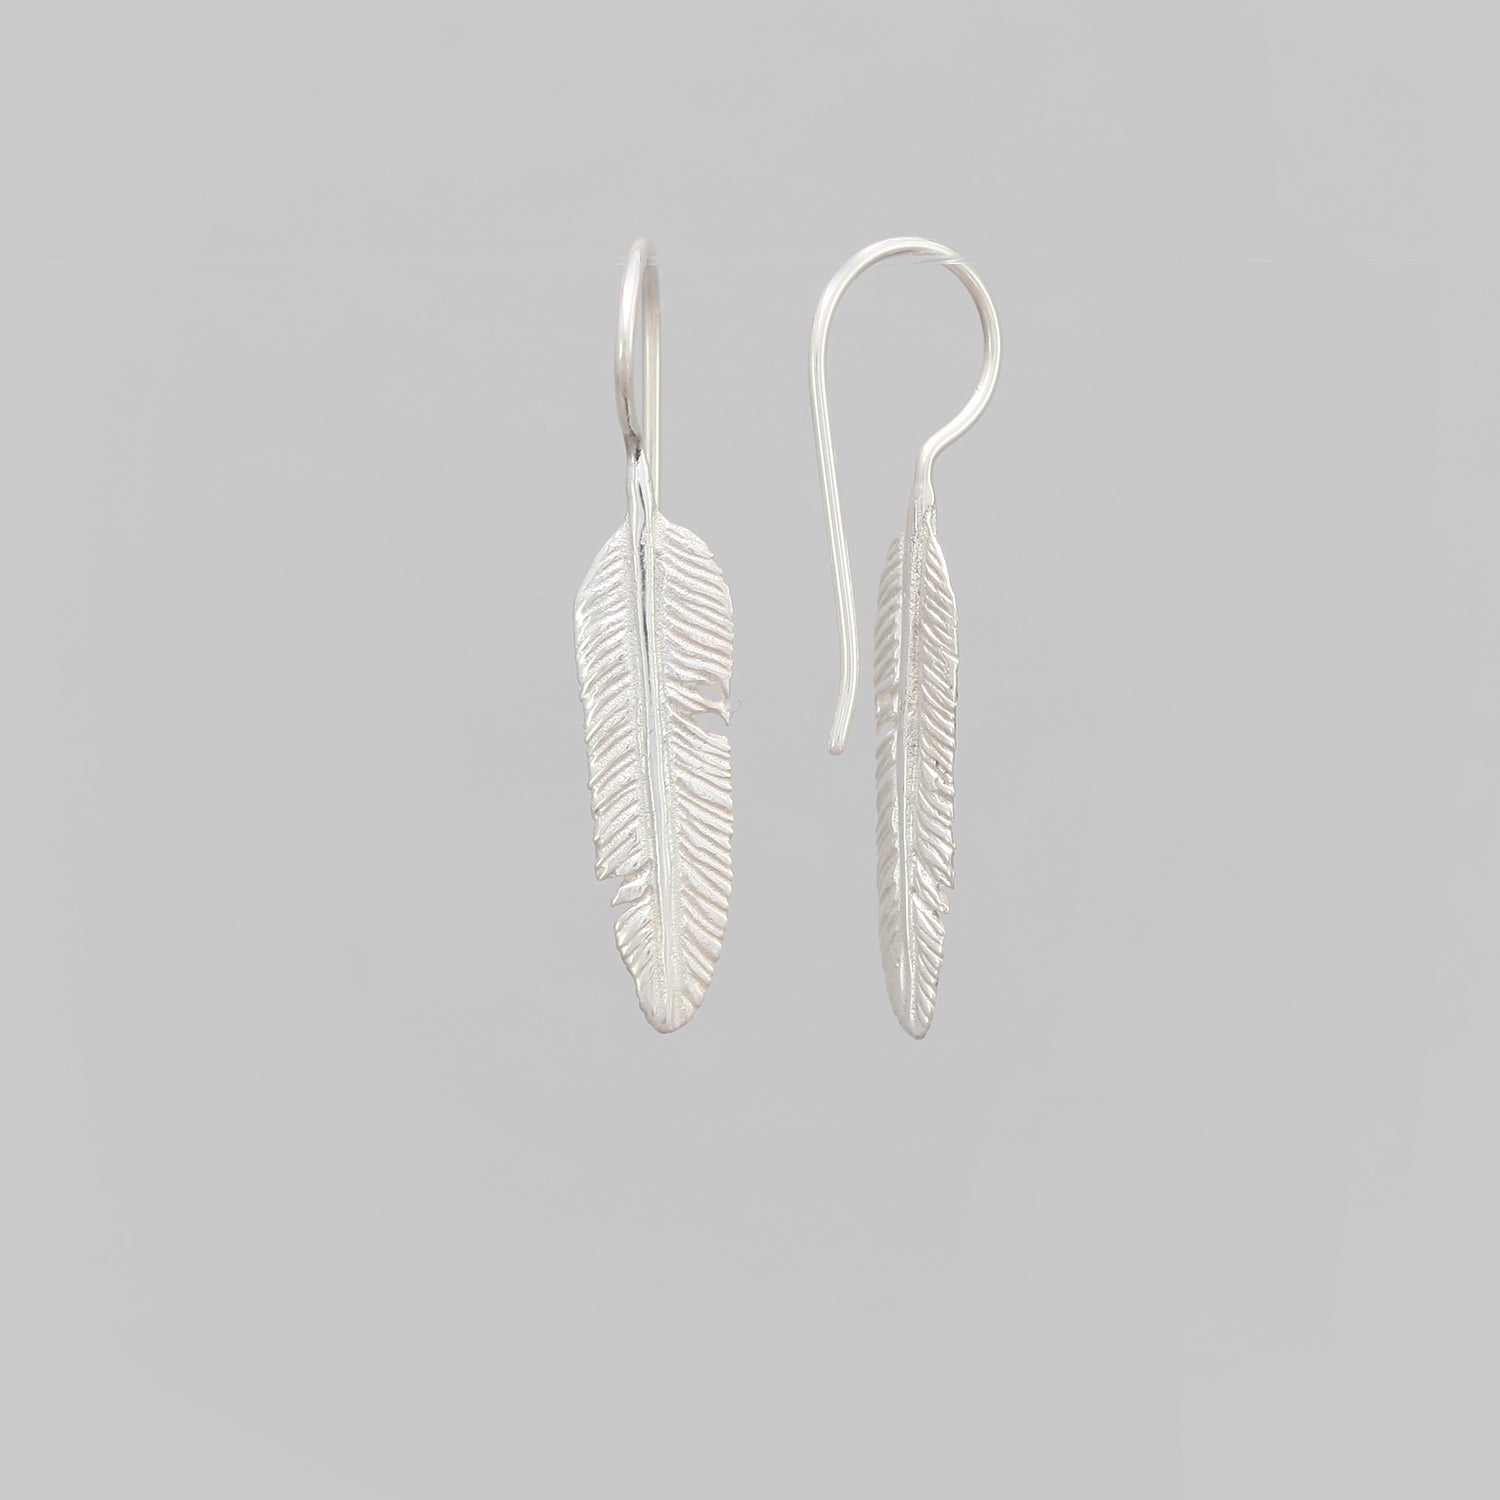 Feather Earring Pendenties | Small Feather Earrings | Feather Stud Earring  - Small - Aliexpress